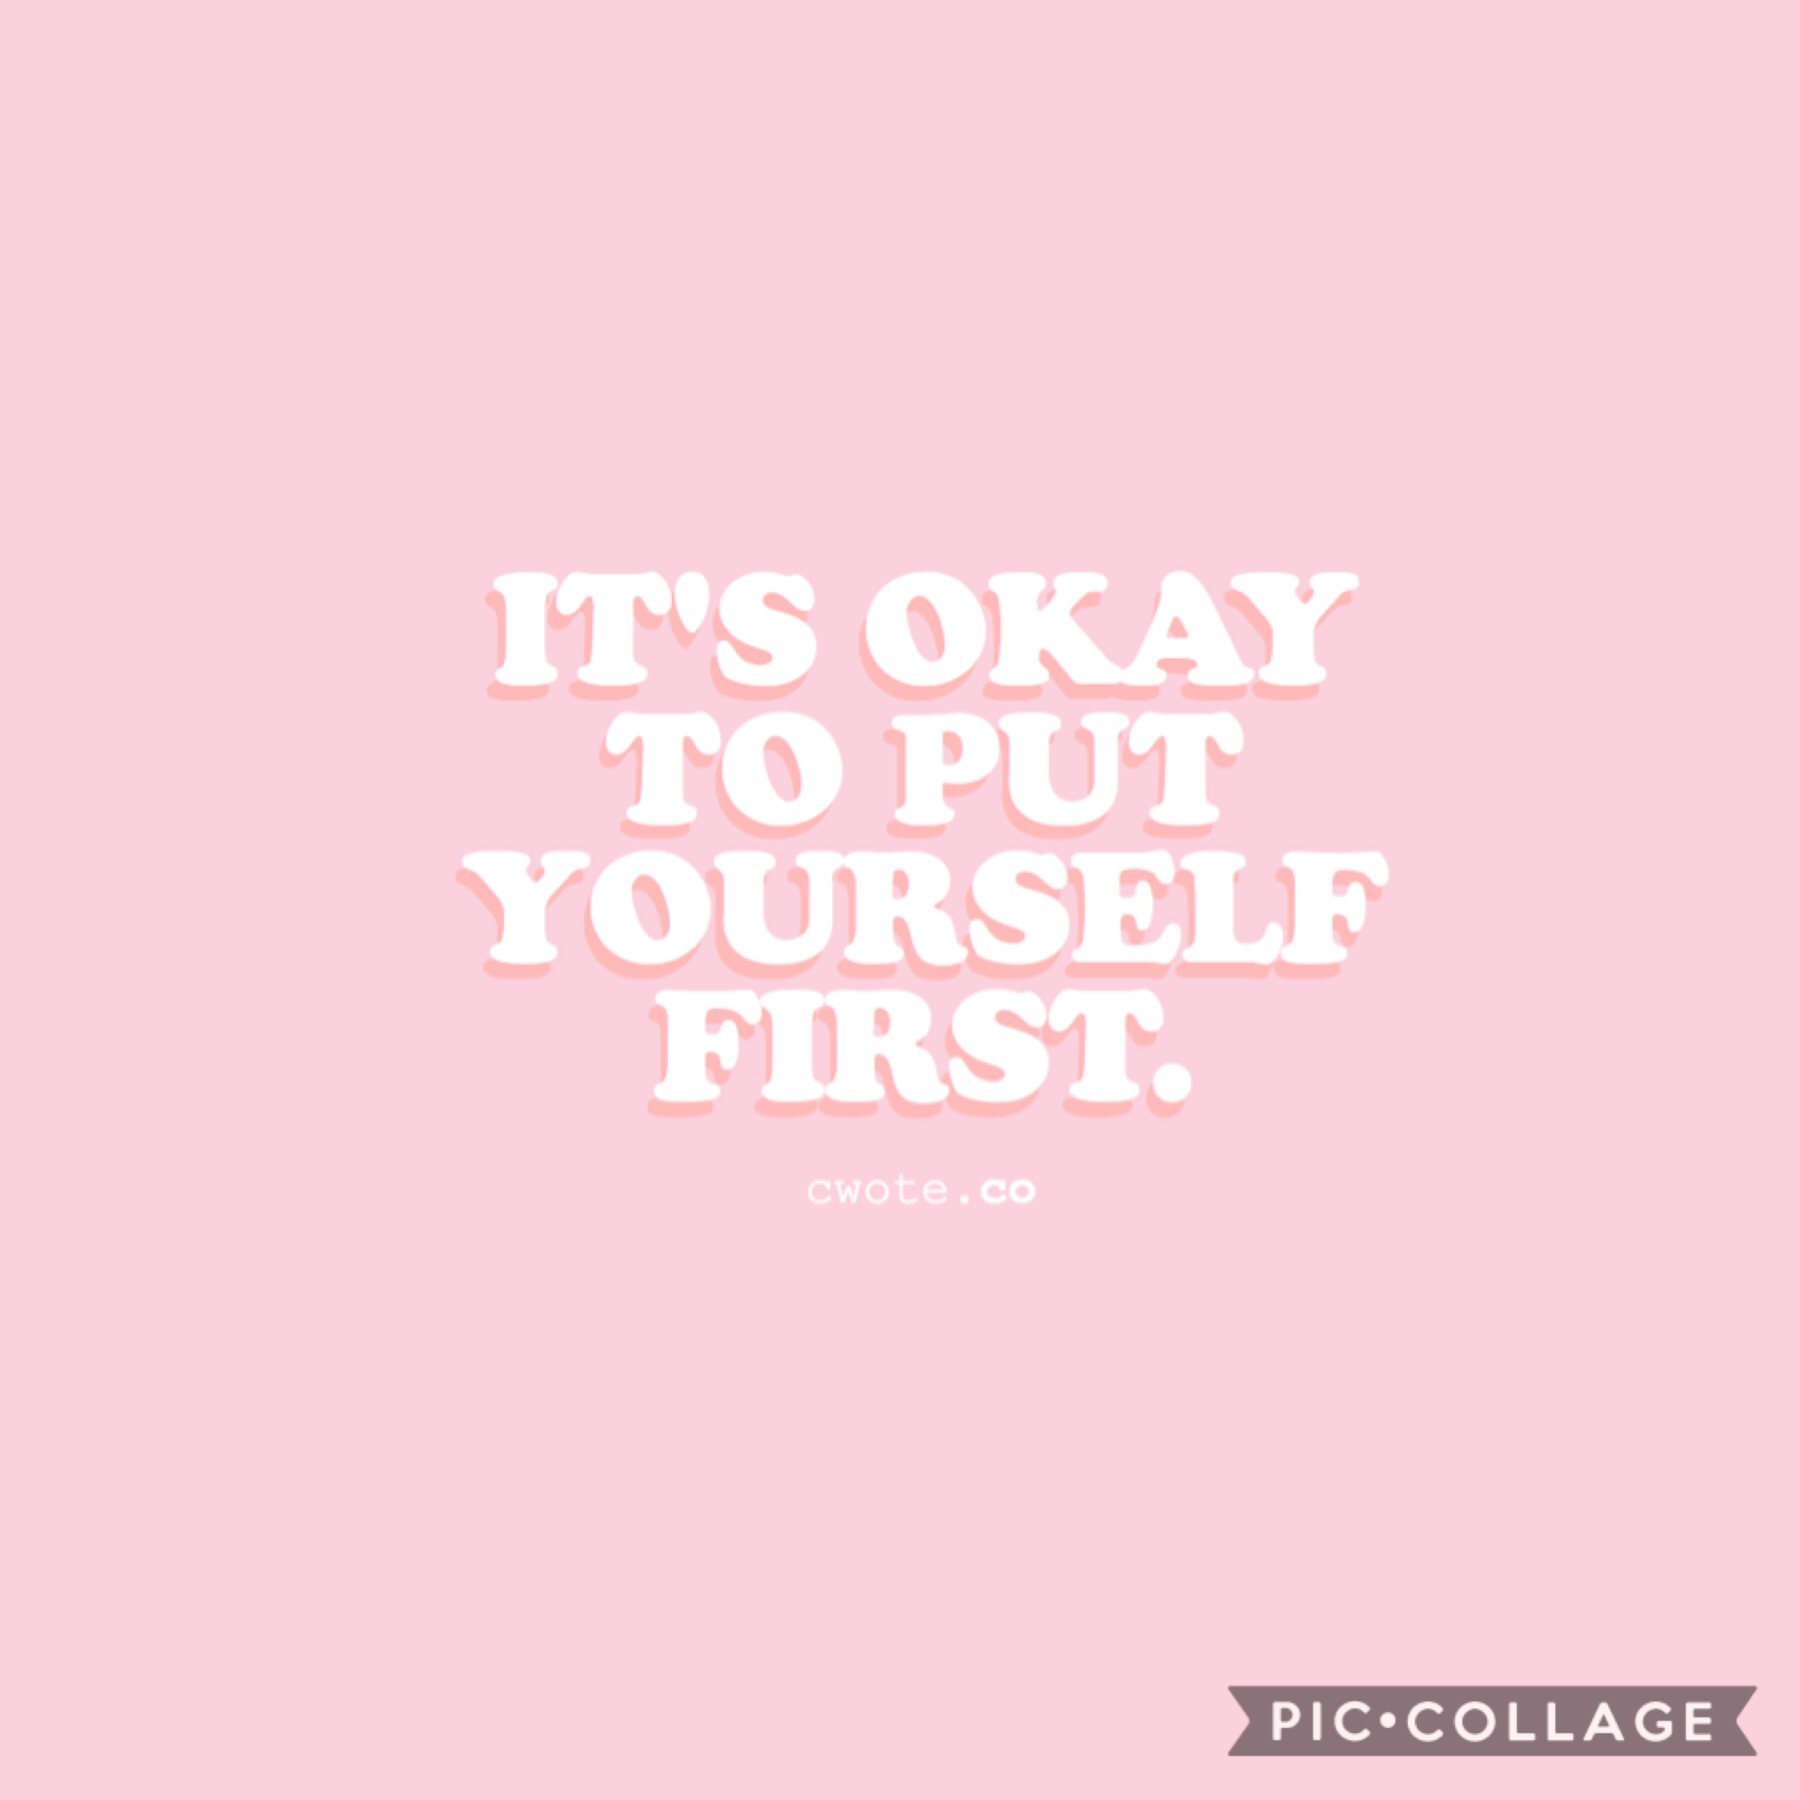 Self-care is not selfish!💜take time to rest, and do what you love!🎆if you need anyone we’re here💟stay strong☯️Self-care is not selfish!☮️